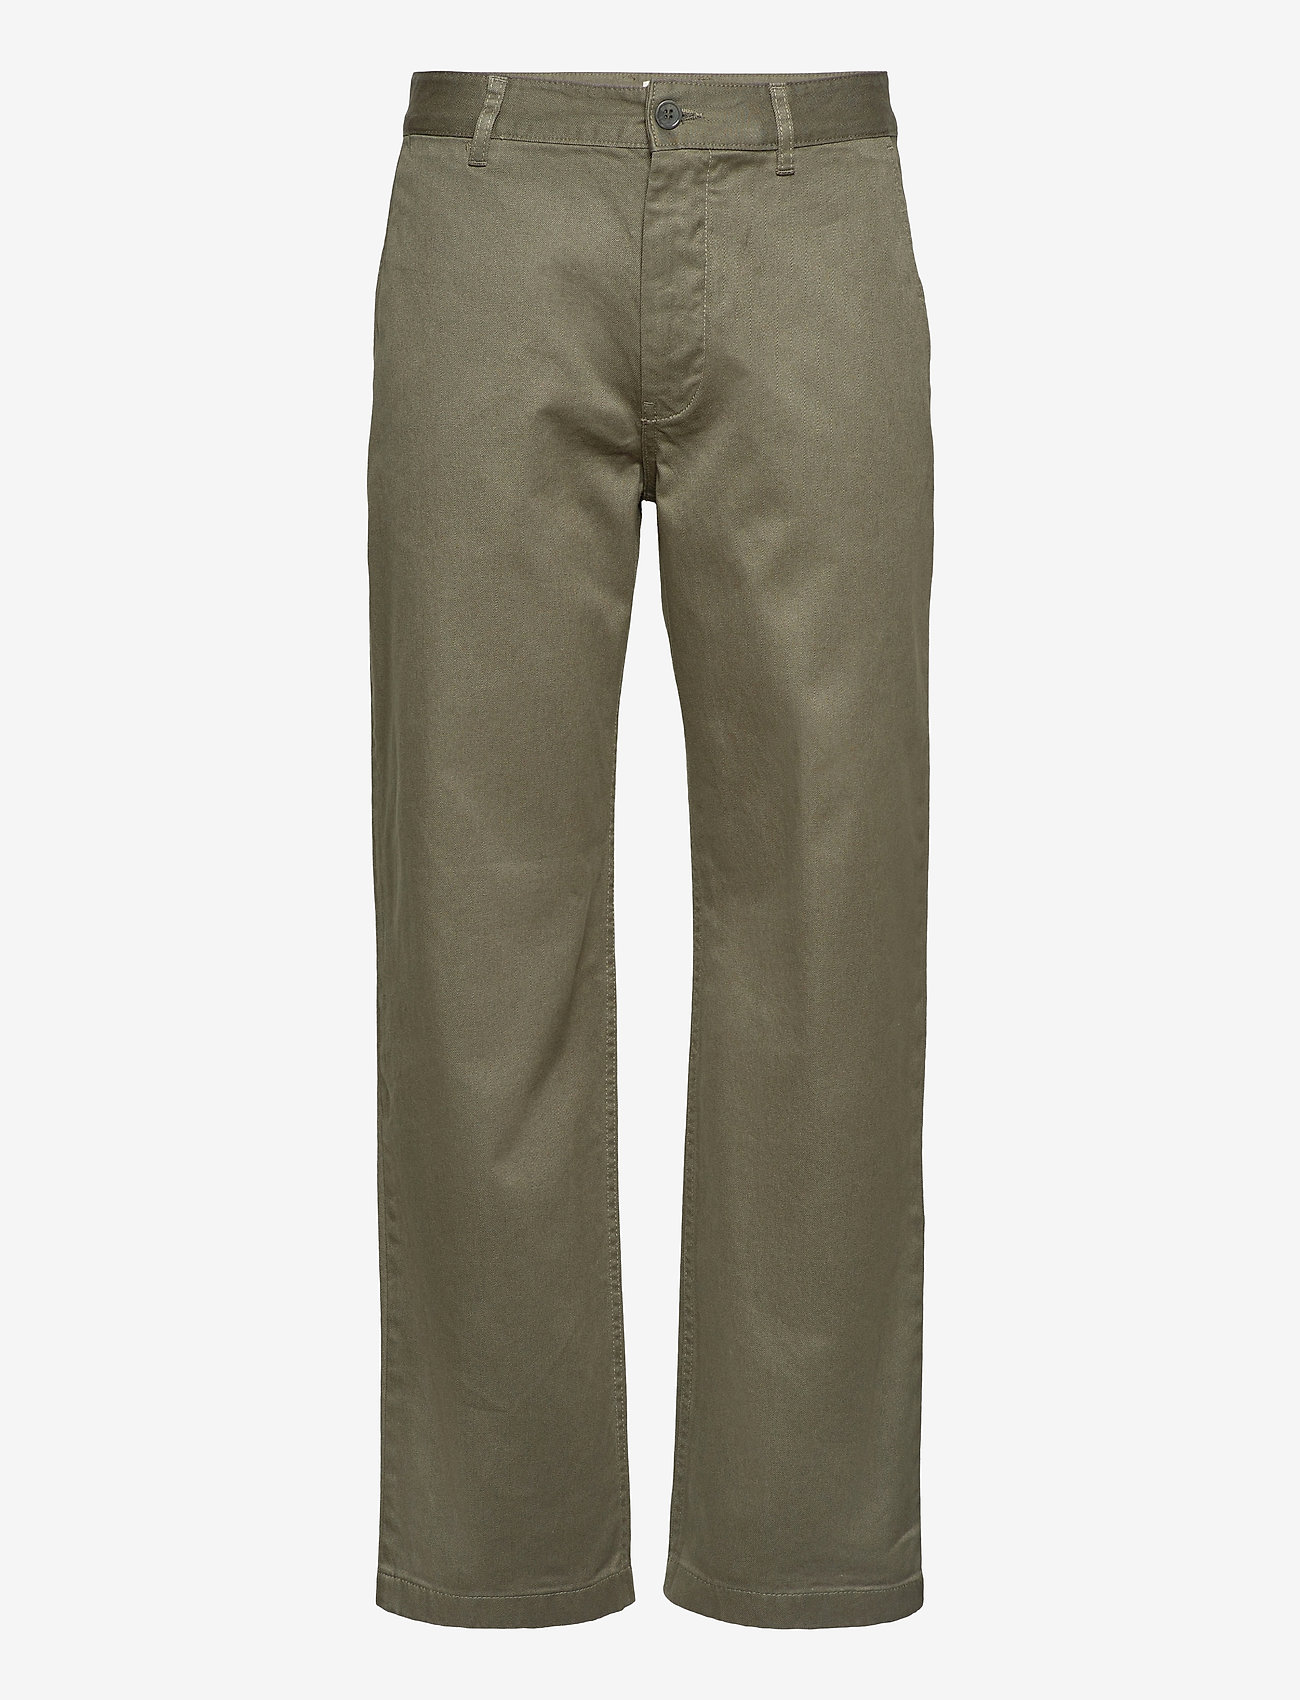 Wood Wood - Stefan classic trousers - chinosy - olive - 0